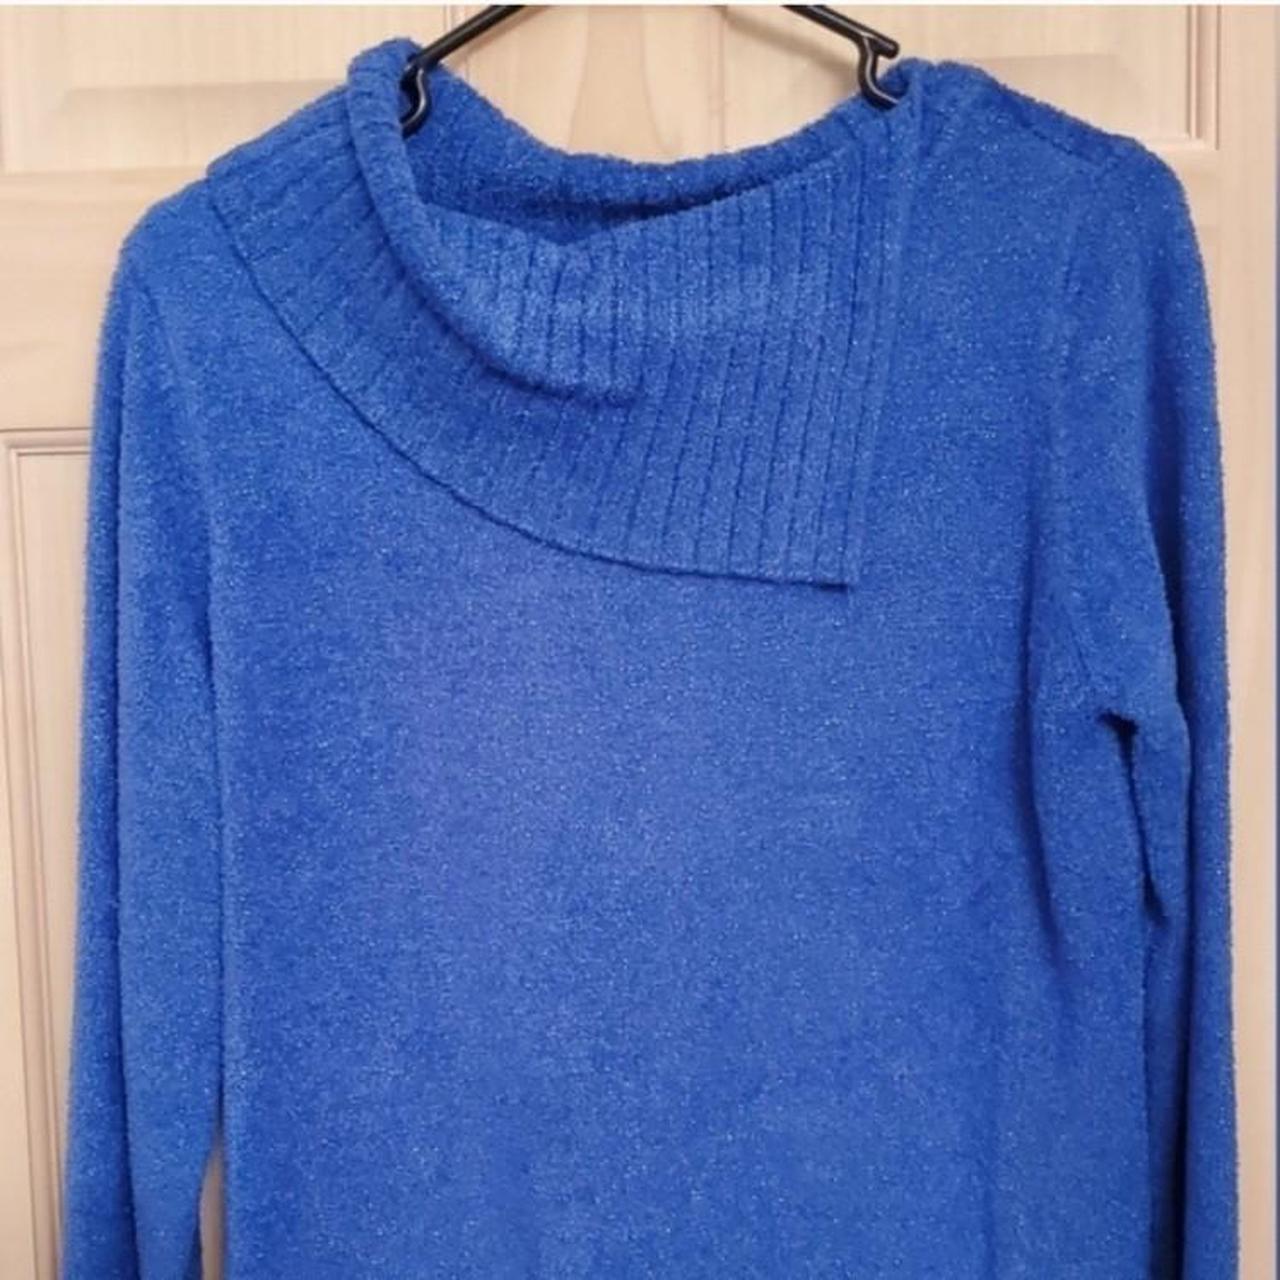 Pretty blue sweater, very soft. In excellent... - Depop